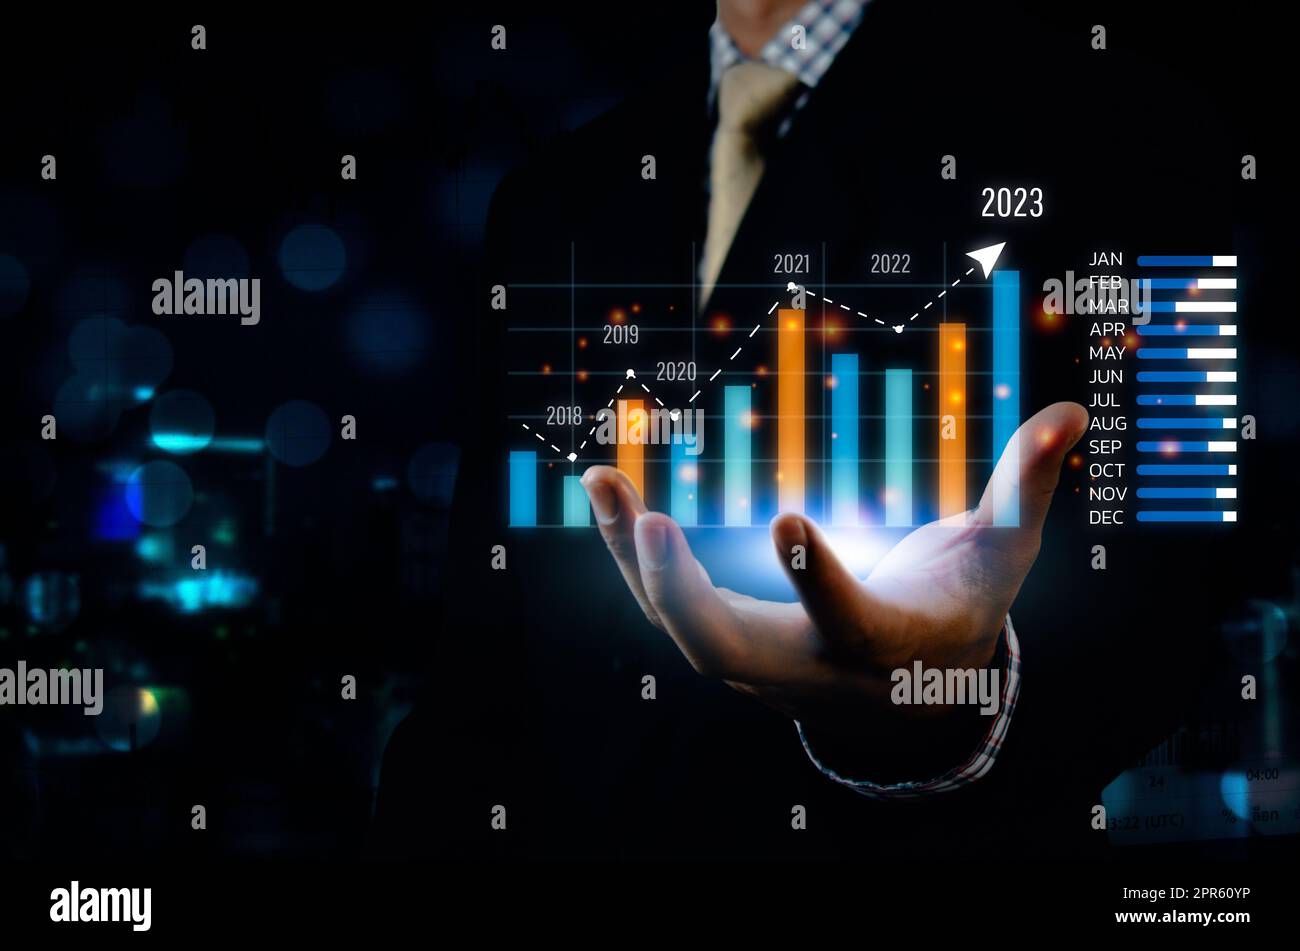 Big data graph virtual screen 2023 in economic analysis and investment finance and marketing planning business concept. Stock Photo